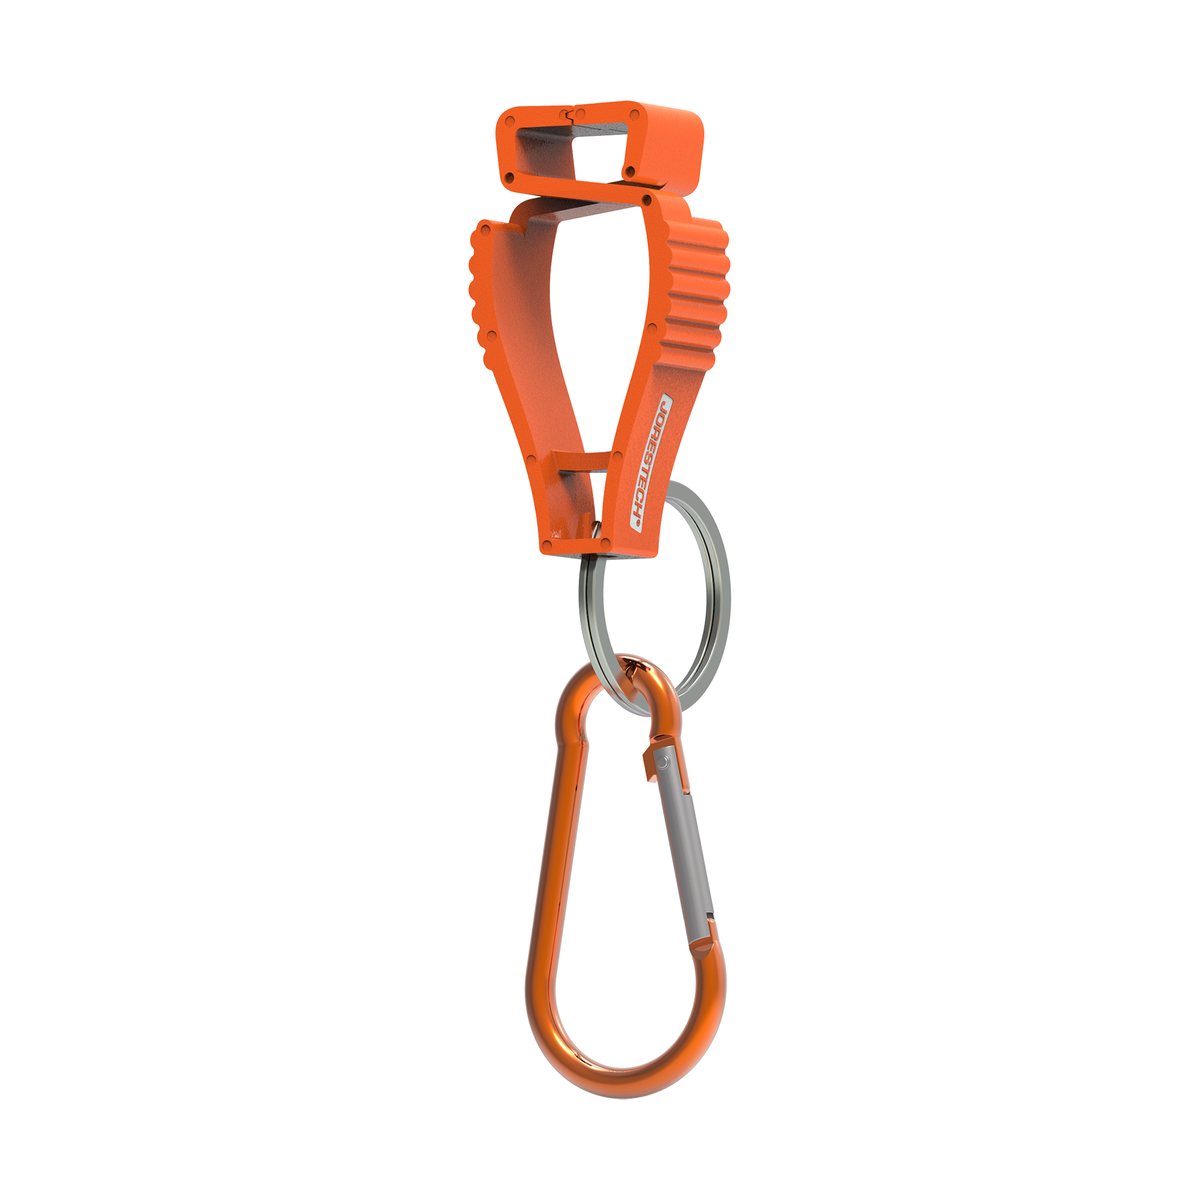 The Glove Thang Carabiner - The Glove Thang